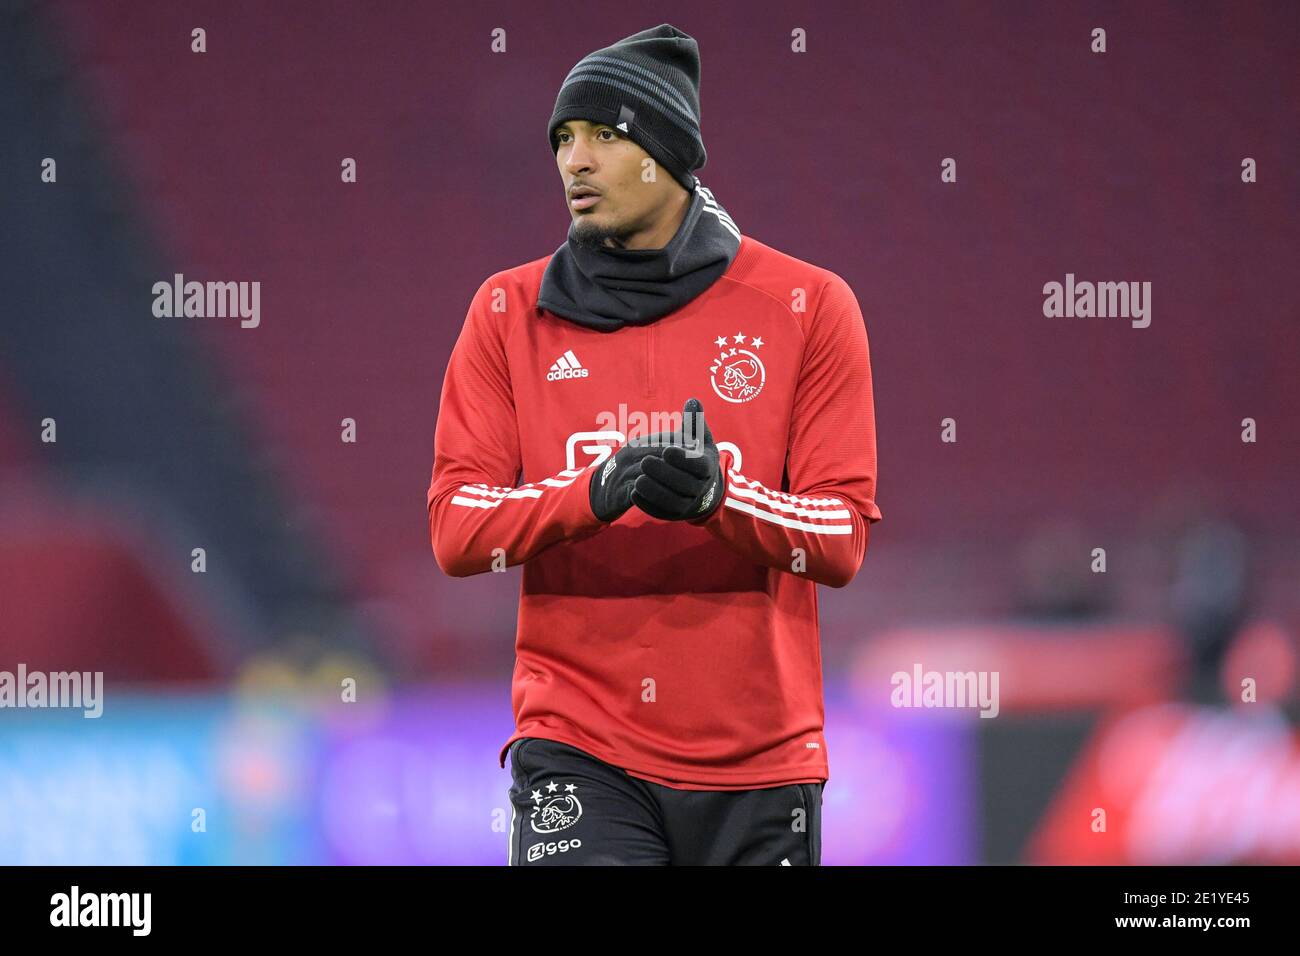 AMSTERDAM, NETHERLANDS - JANUARY 10: Sebastien Haller of Ajax during the Dutch Eredivisie match between Ajax and PSV at Johan Cruijff Arena on January 10, 2021 in Amsterdam, Netherlands (Photo by Gerrit van Keulen/BSR Agency/Orange pictures/Alamy Live News) Stock Photo